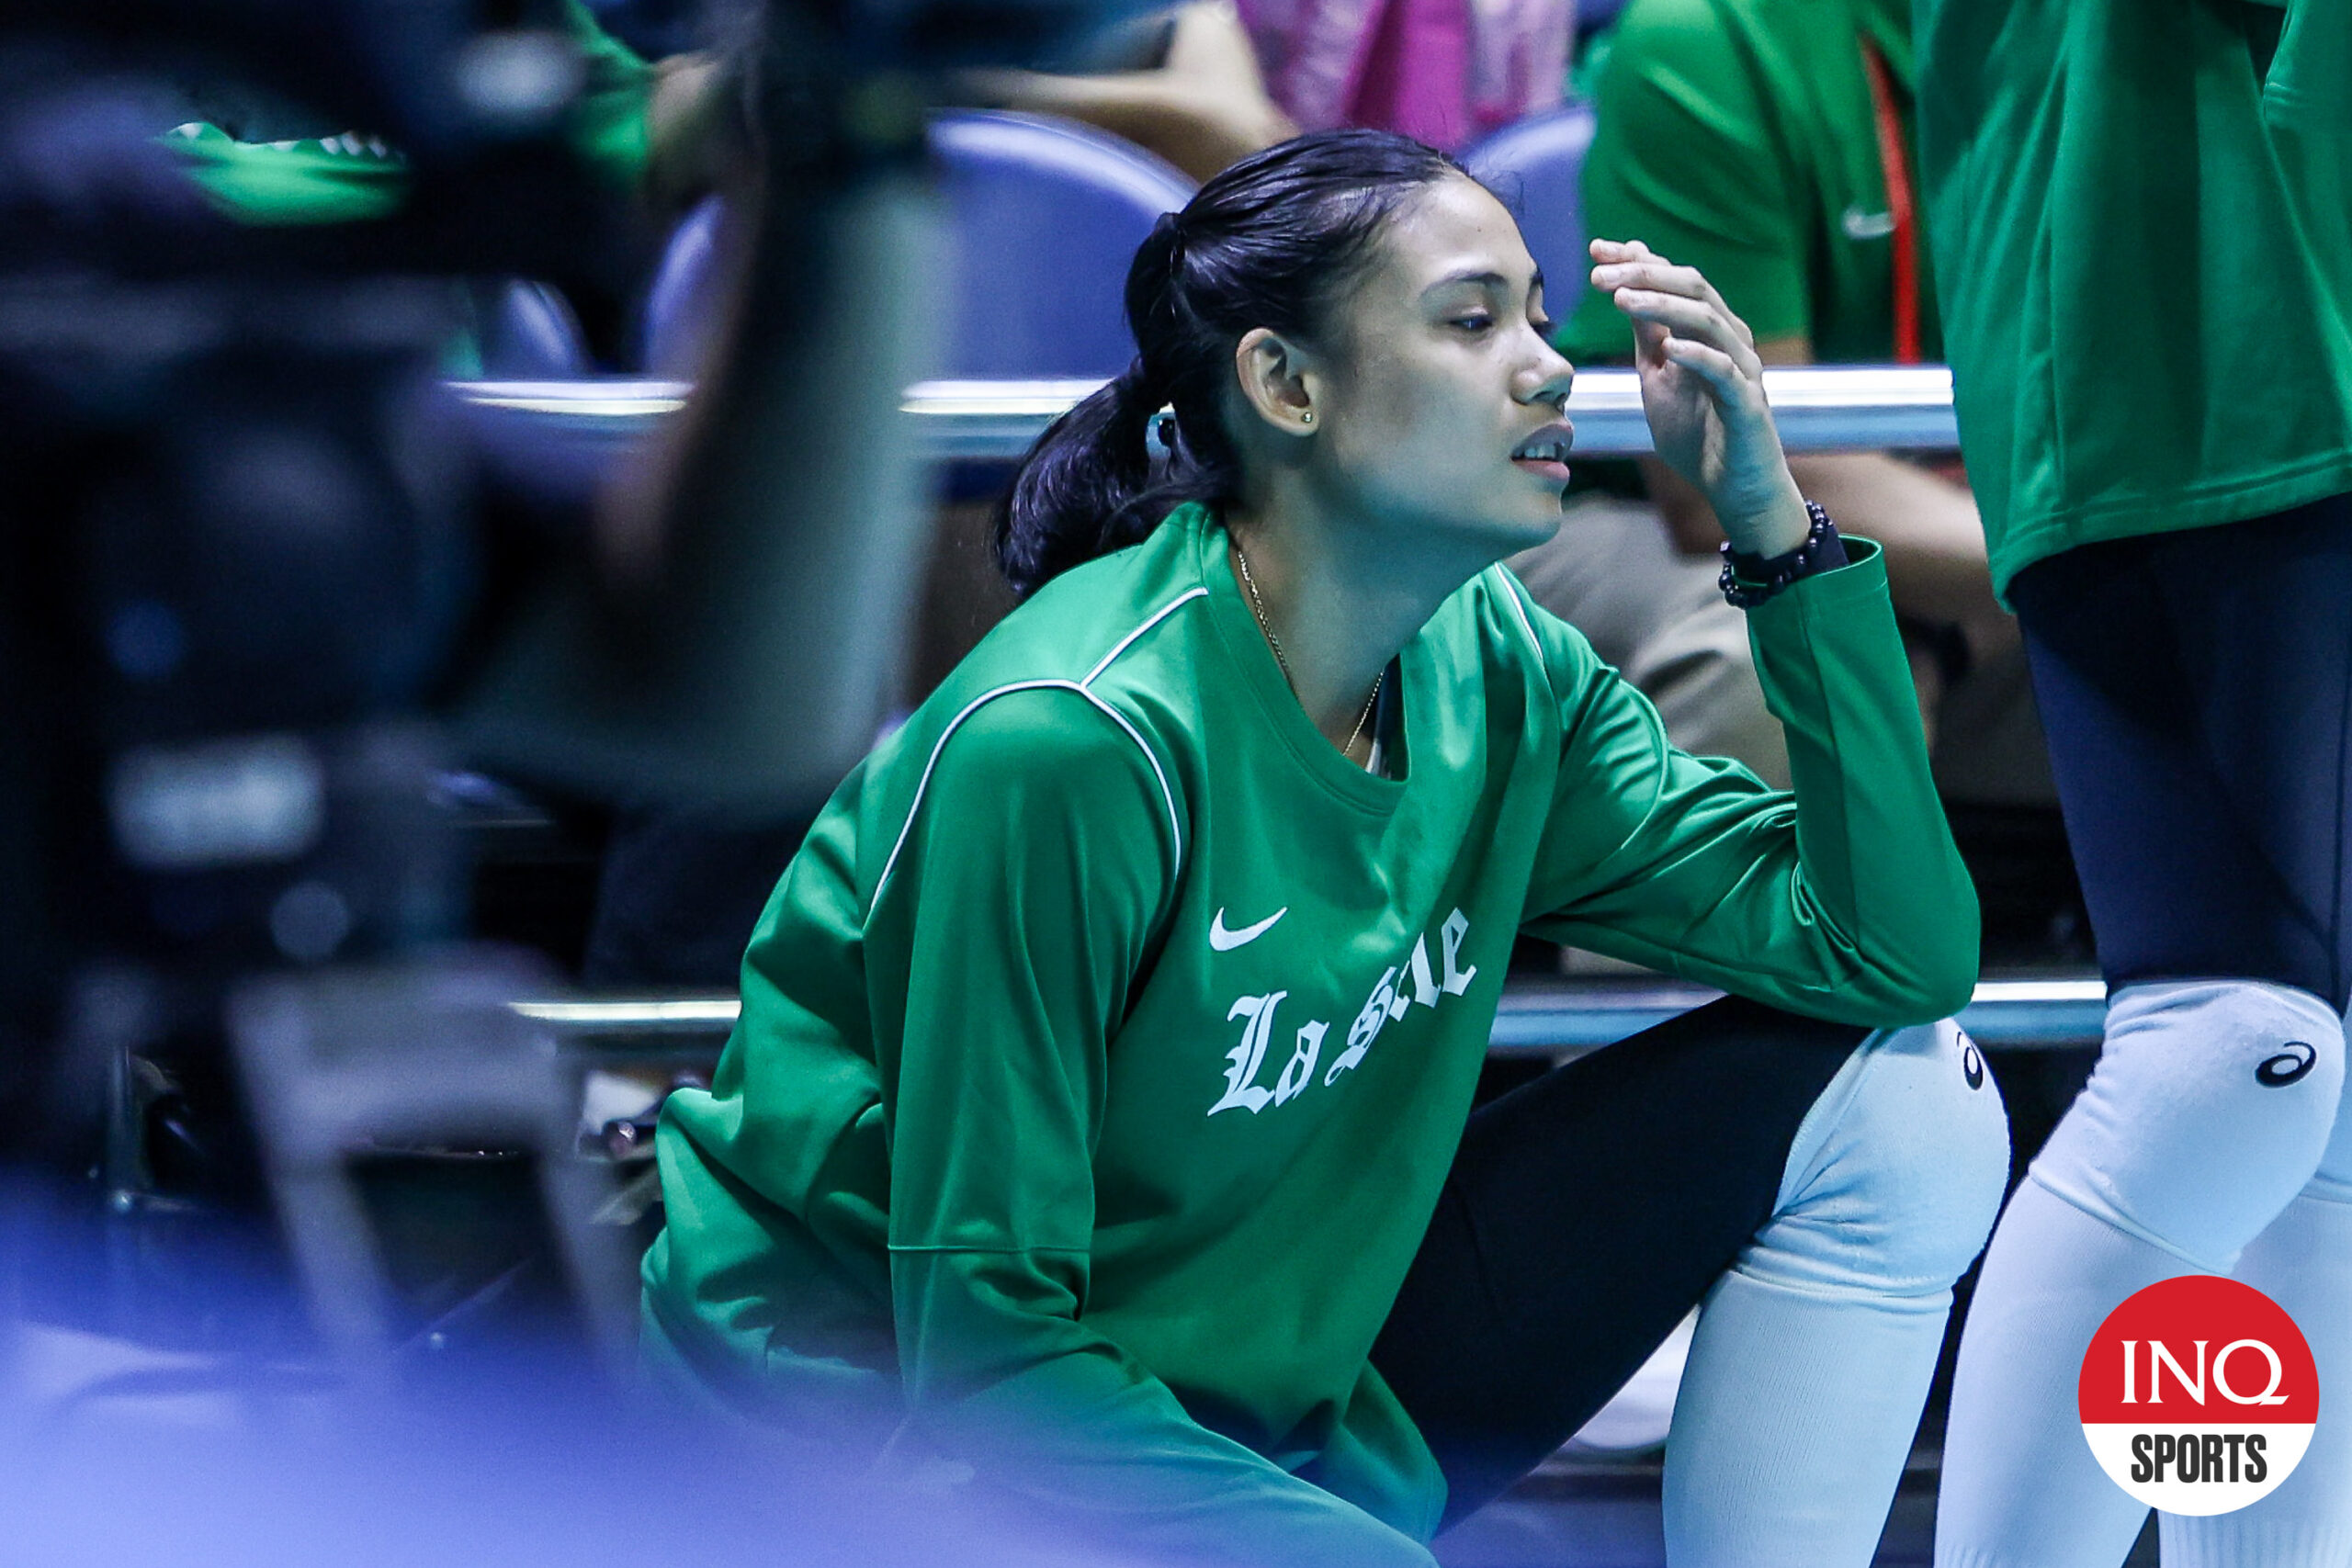 La Salle Lady Spikers star Angel Canino is sidelined with arm injury in the UAAP Season 86 women's volleyball tournament. –MARLO CUETO/INQUIRER.net